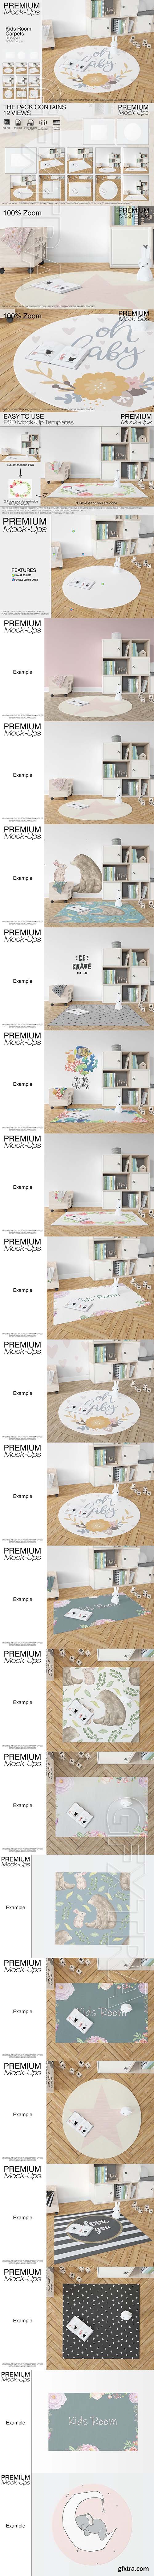 CreativeMarket - 3 Types of Carpets in Kids Room 2584676